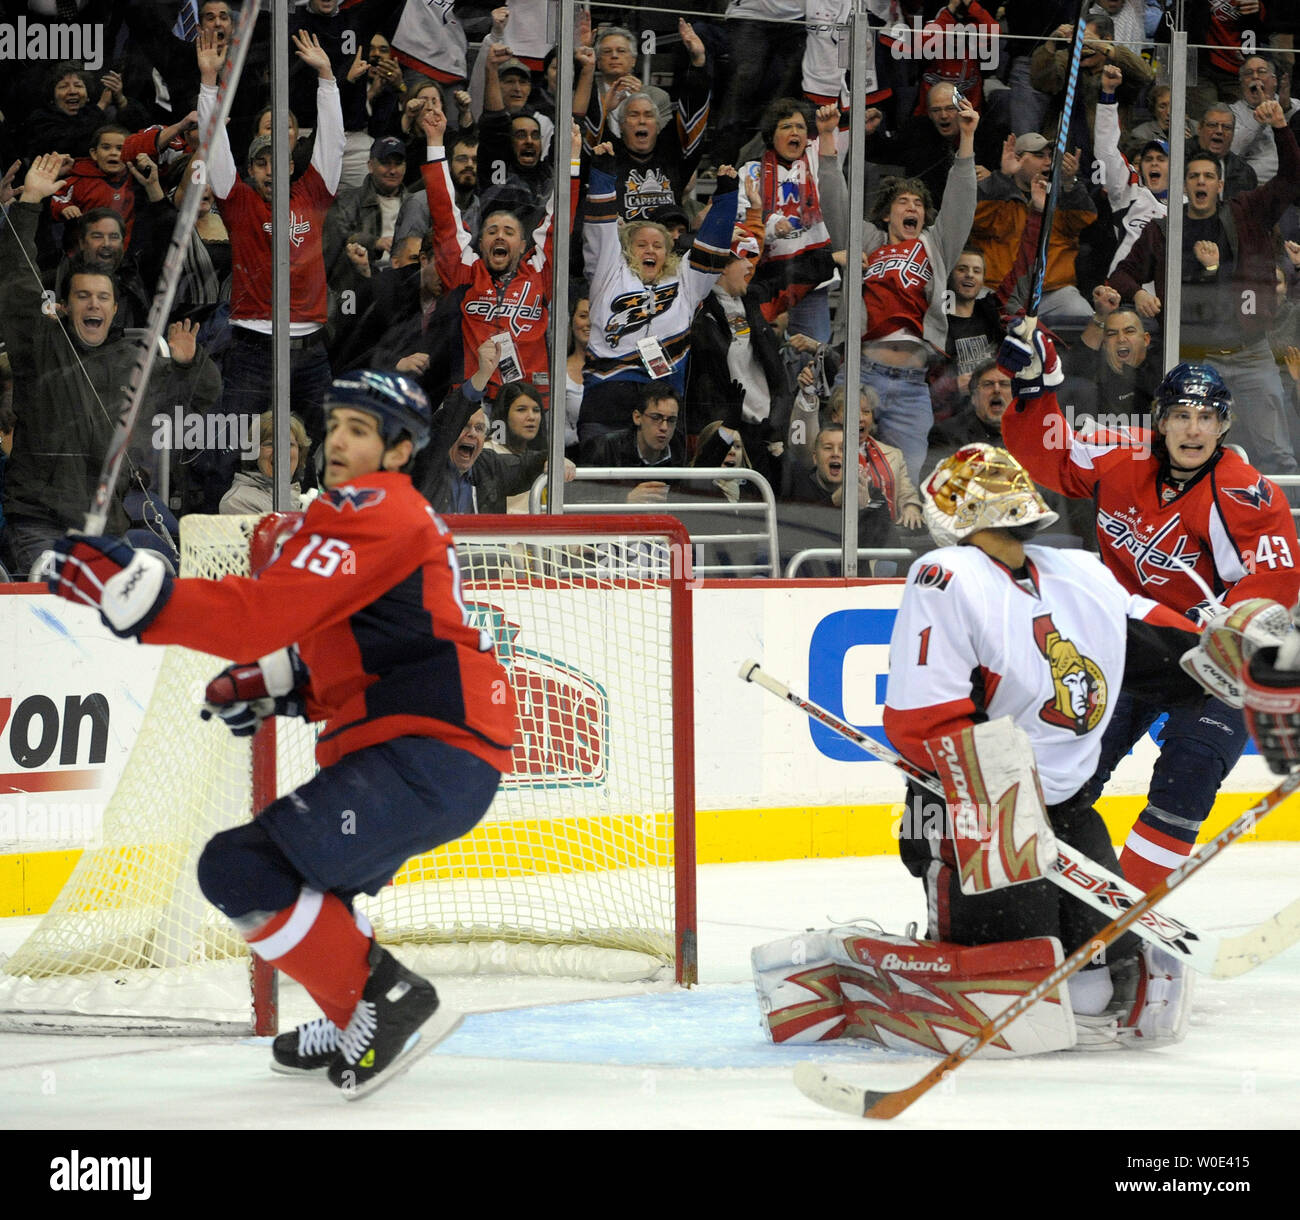 Washington Capitals fans cheer after a goal against Ottawa Senators goalie Roy Emery l in the third period at the Verizon Center in Washington on January 15, 2008. On ice for the Caps are Boyd Gordon (15) and Tomas Fleischmann (43) of the Czech Republic. The Caps won 4-2.  (UPI Photo/Roger L. Wollenberg) Stock Photo